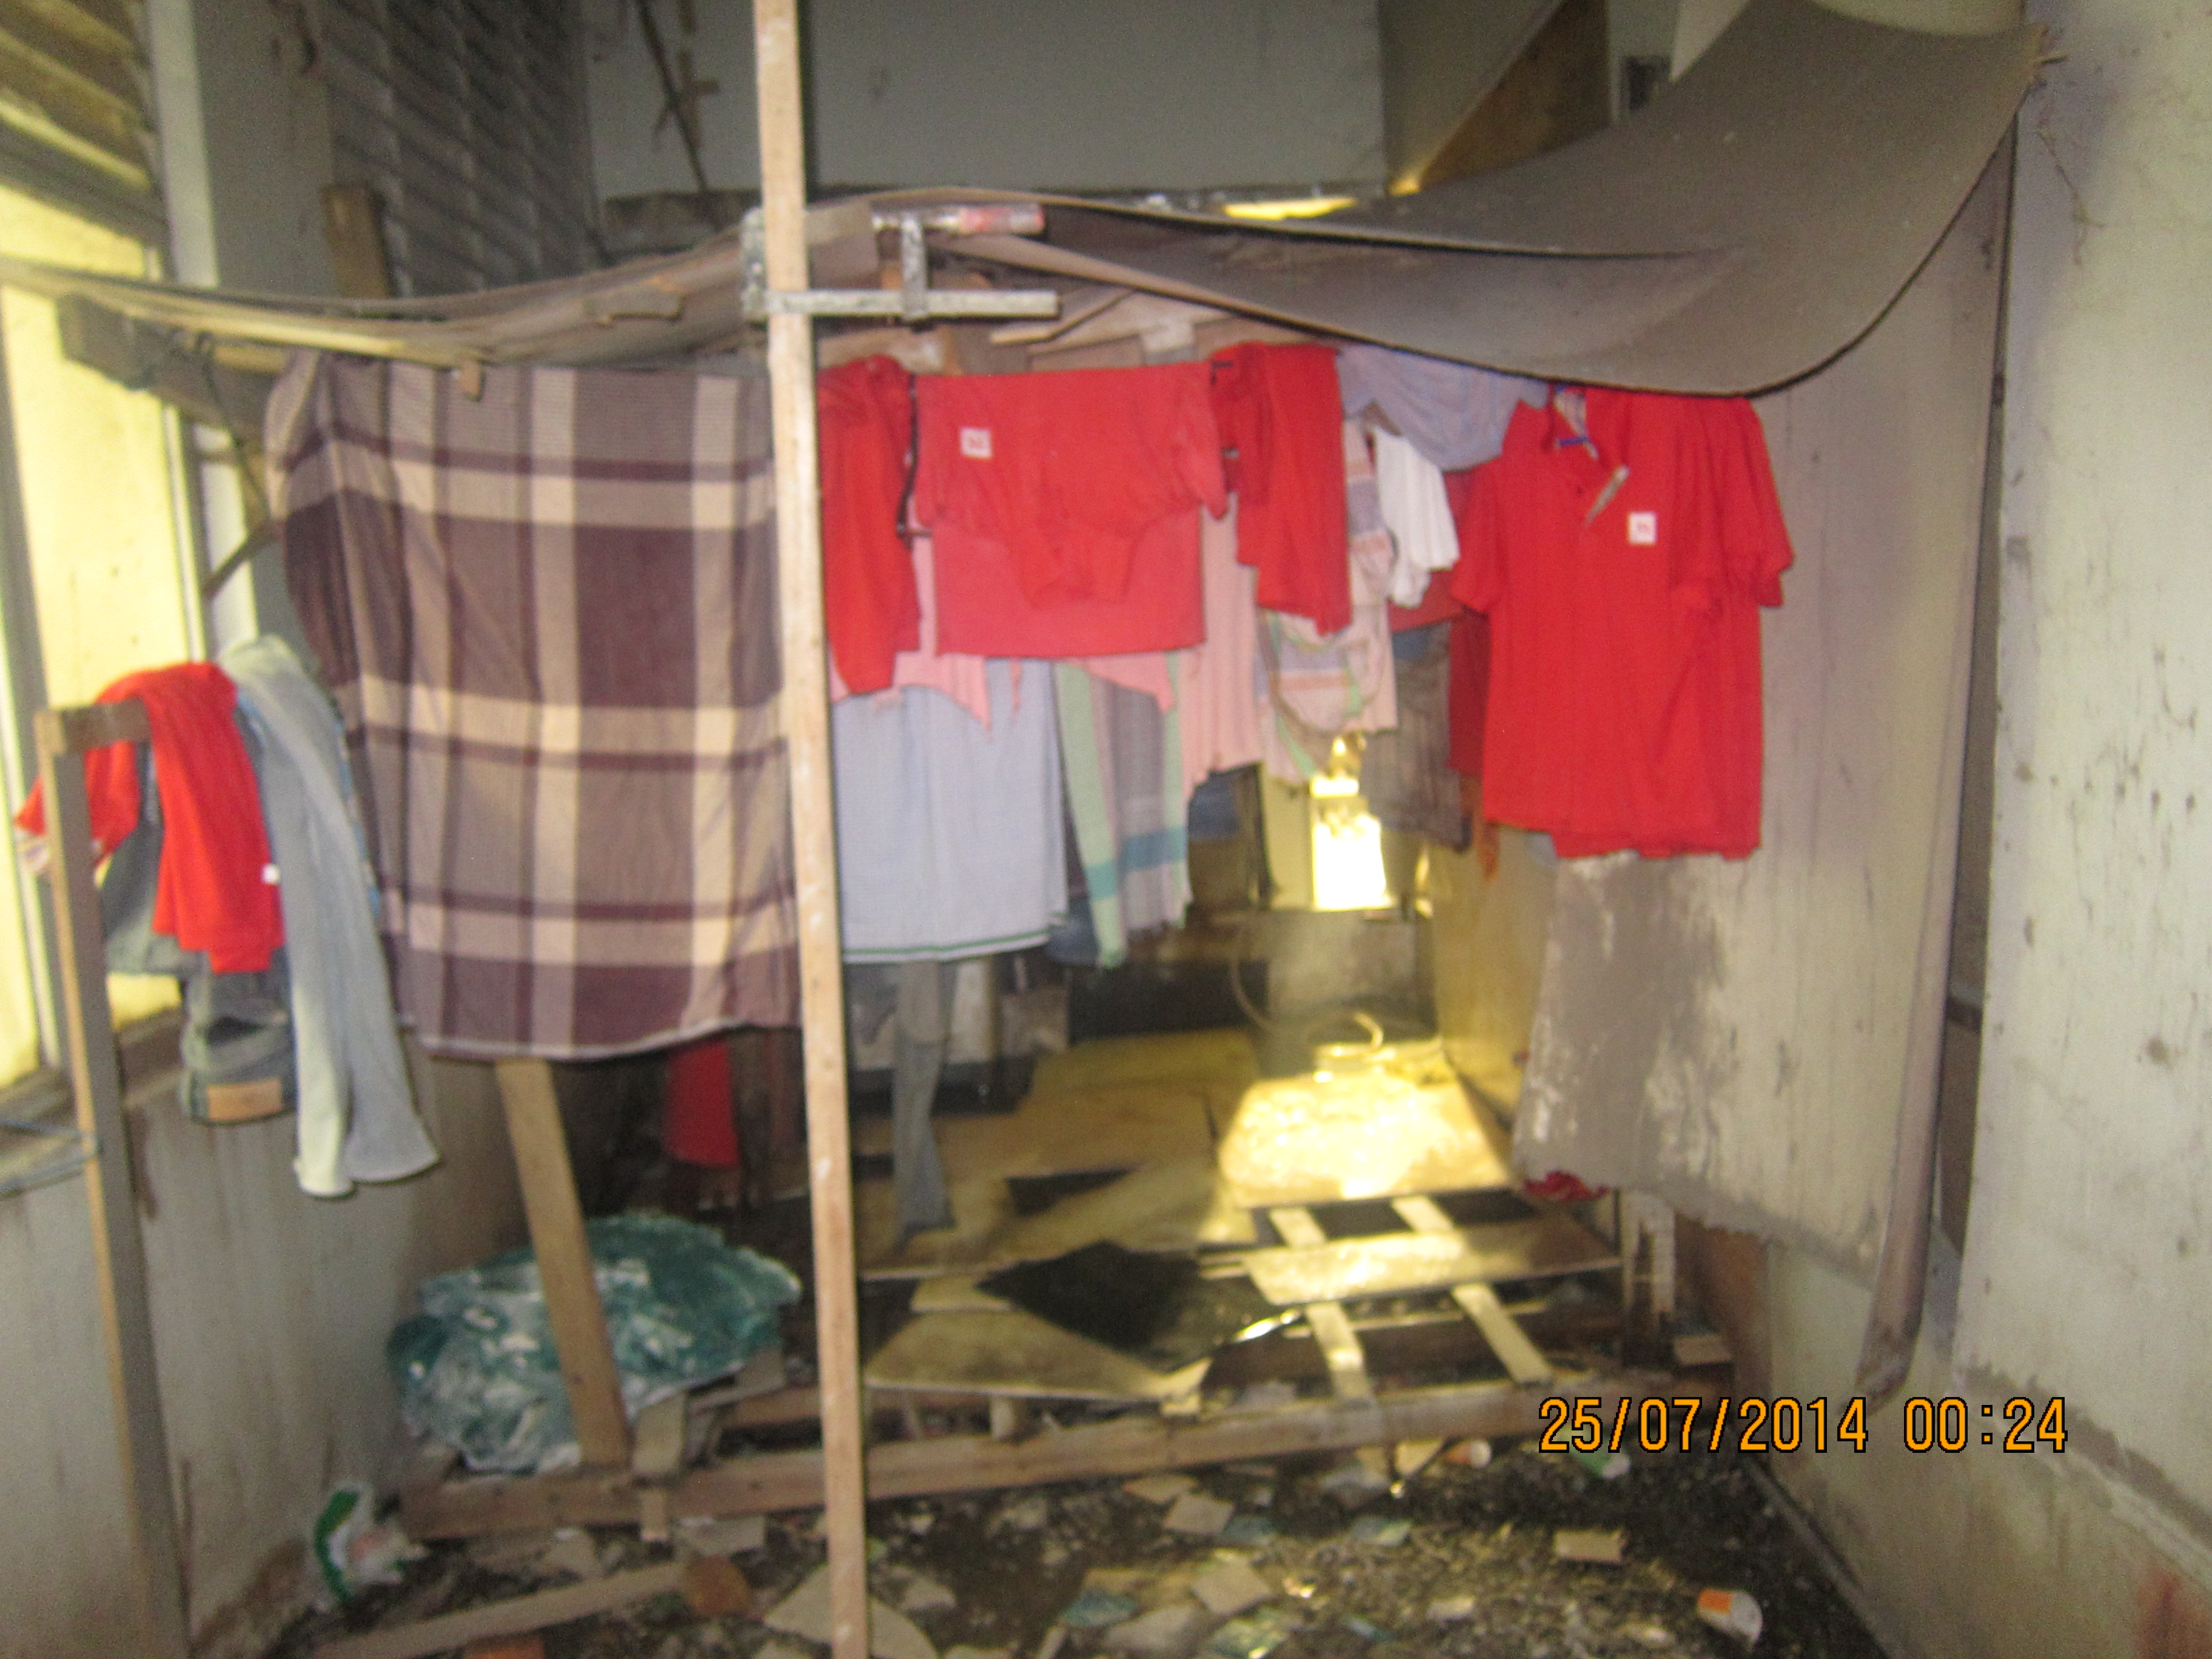 Workers had to live in premises which were not approved to be used as a foreign worker dormitory.